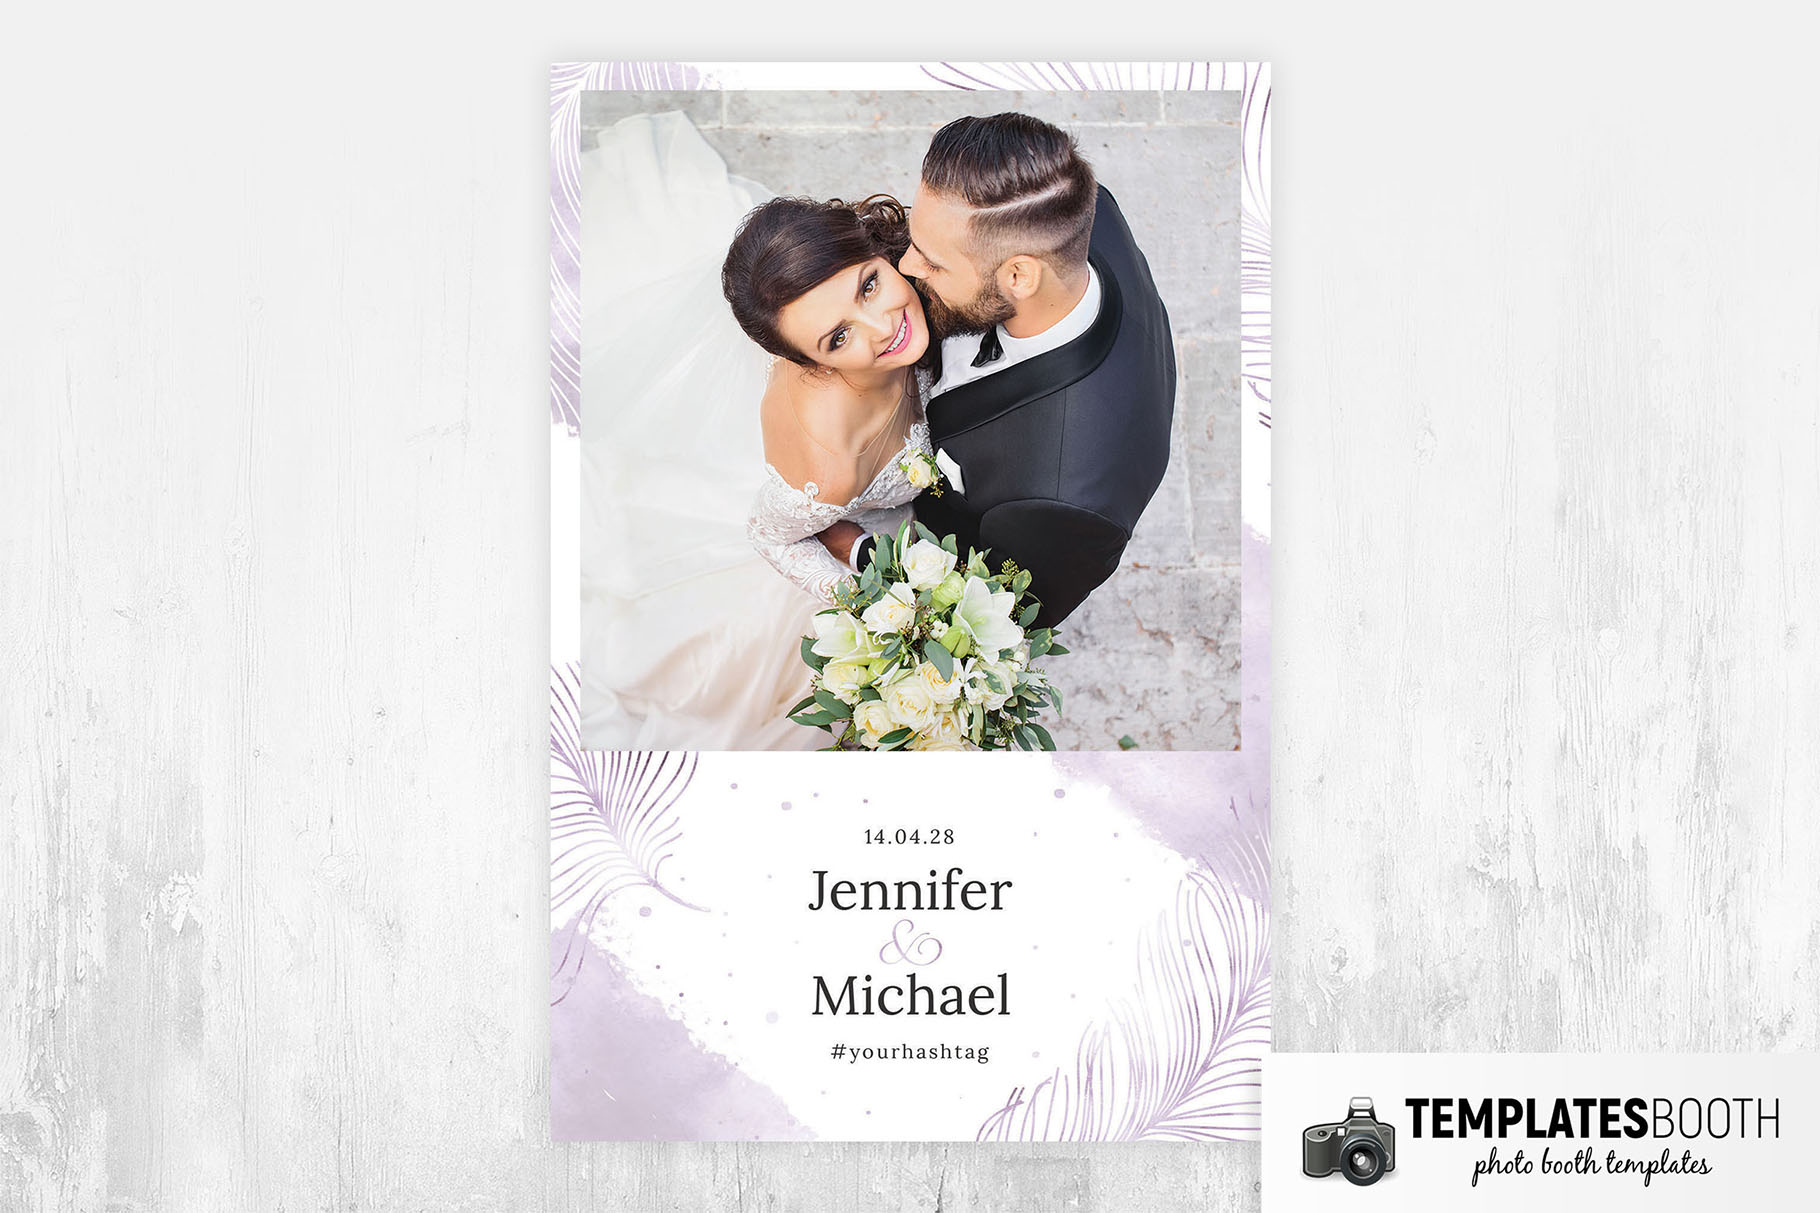 Free Wedding Photo Booth Template